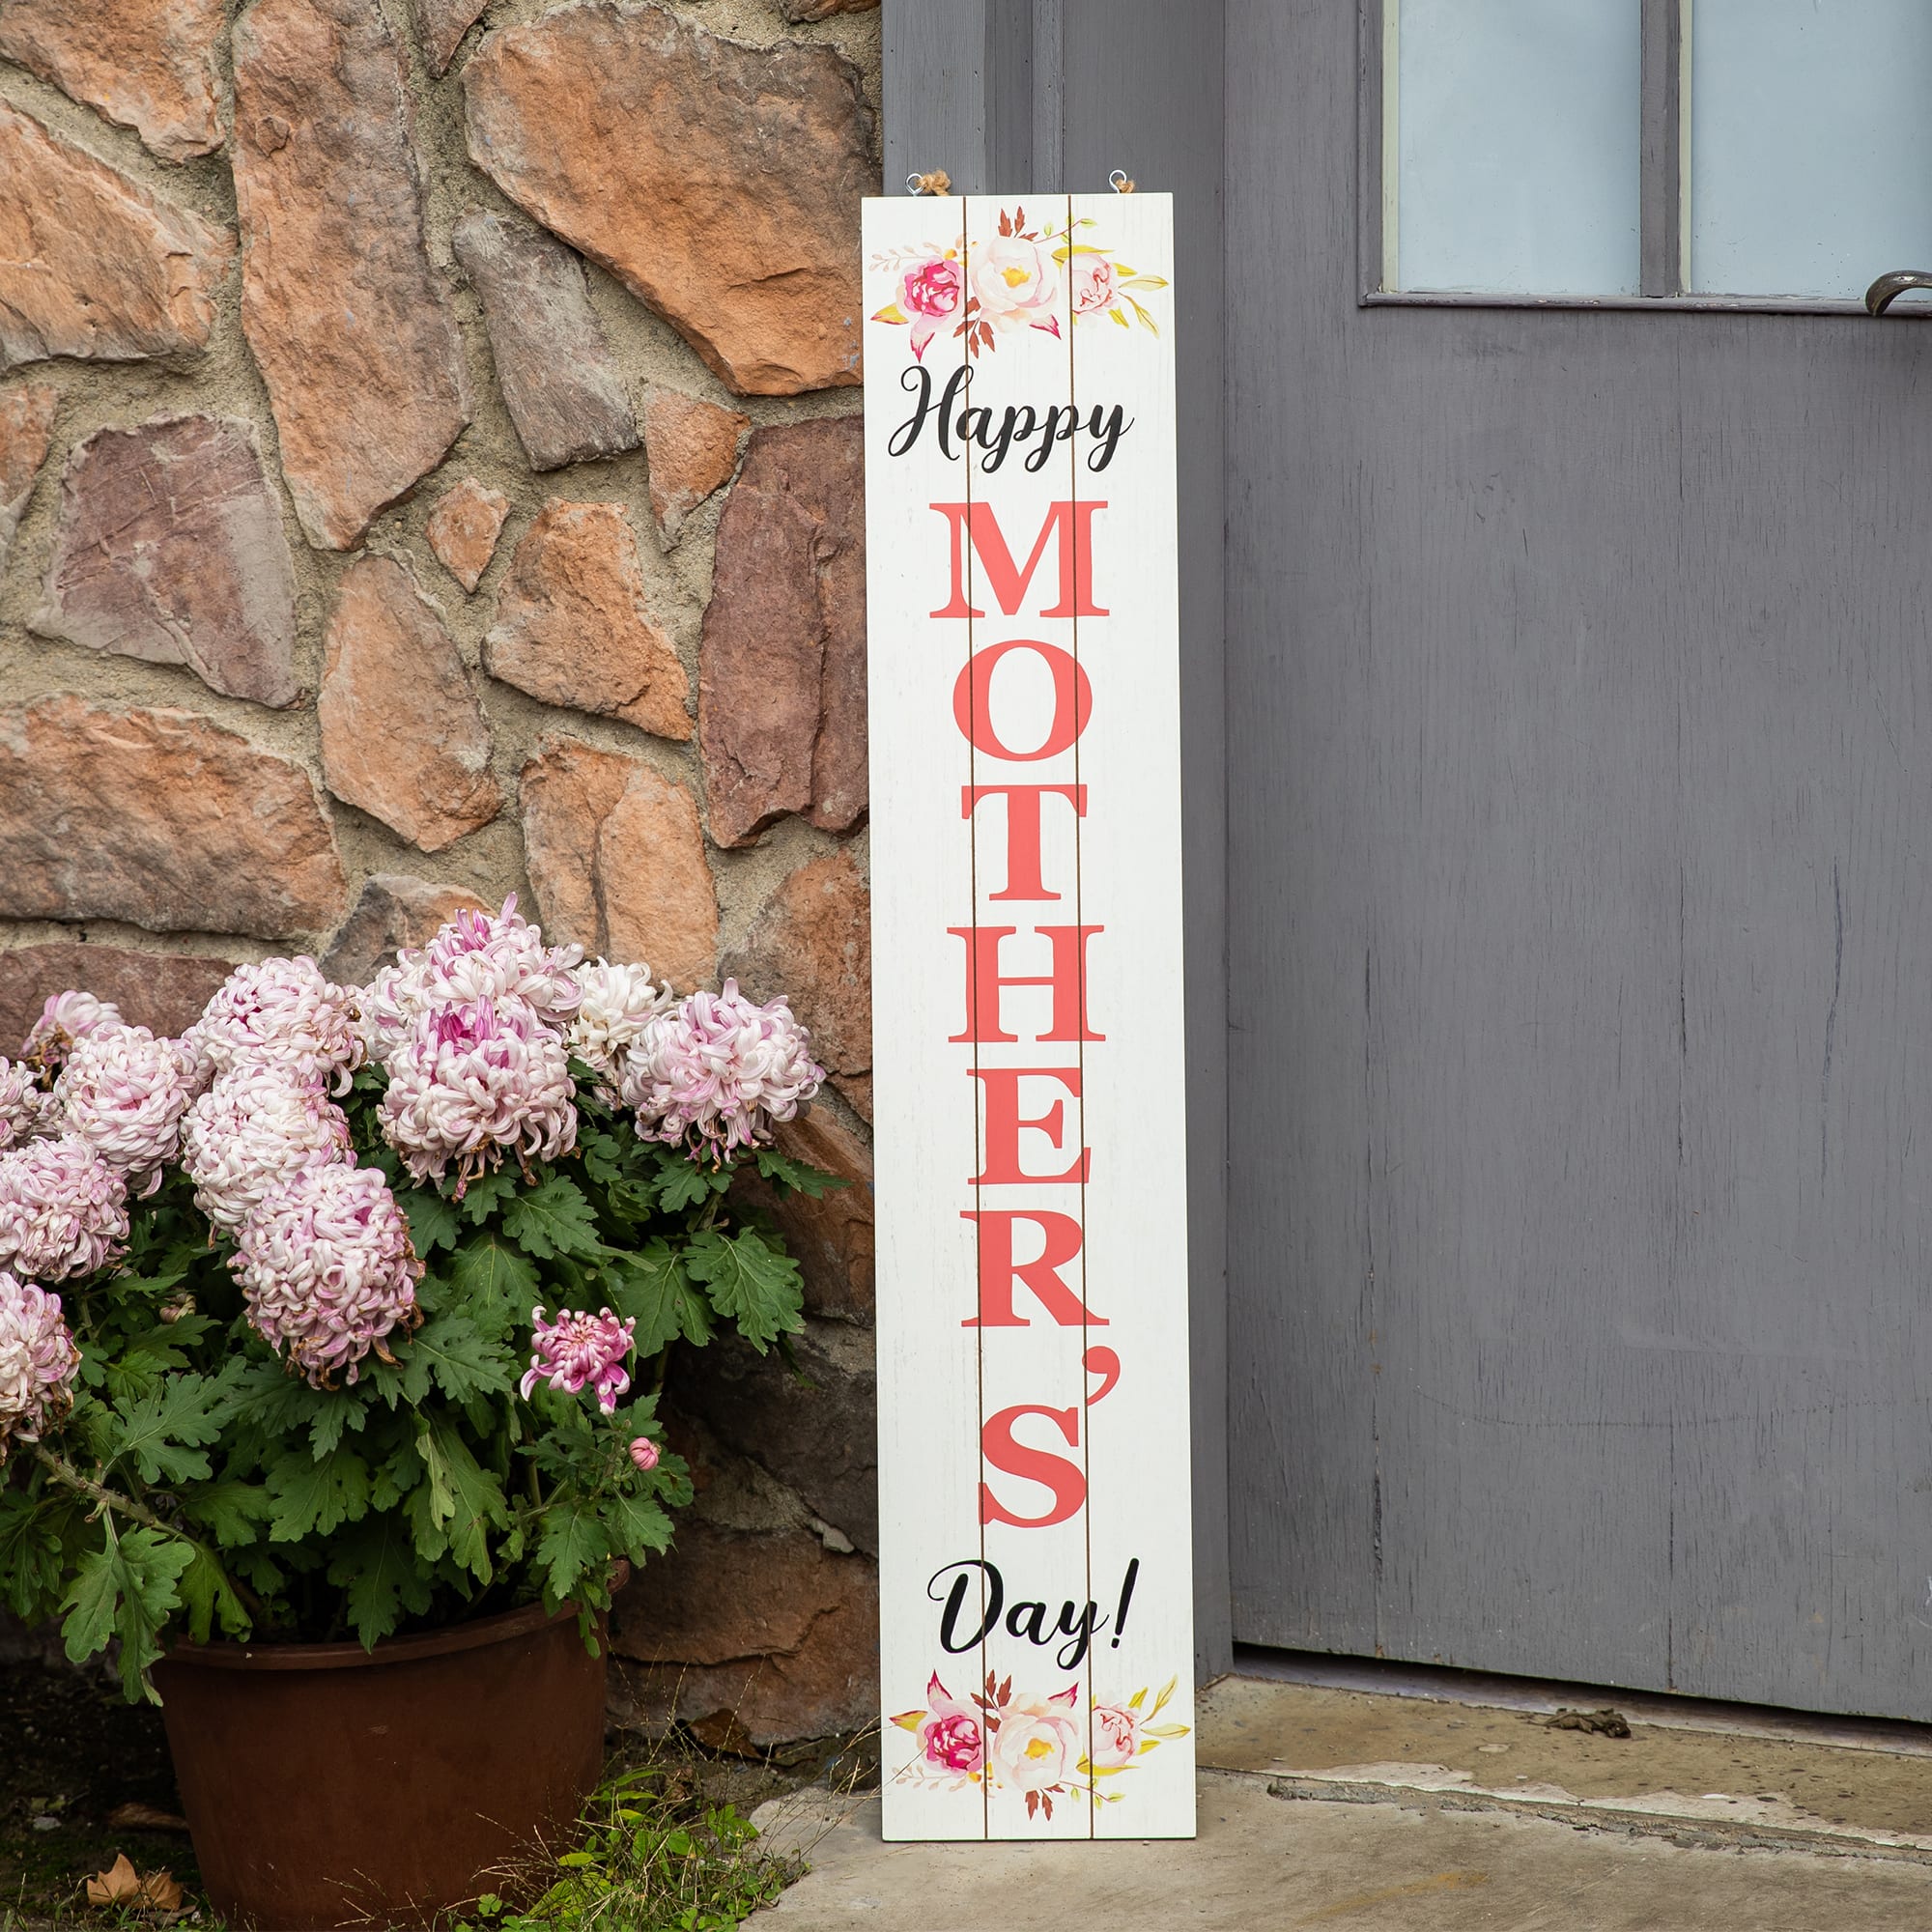 Glitzhome&#xAE; 3.5ft. Double Sided Mother&#x27;s Day &#x26; Father&#x27;s Day Porch D&#xE9;cor